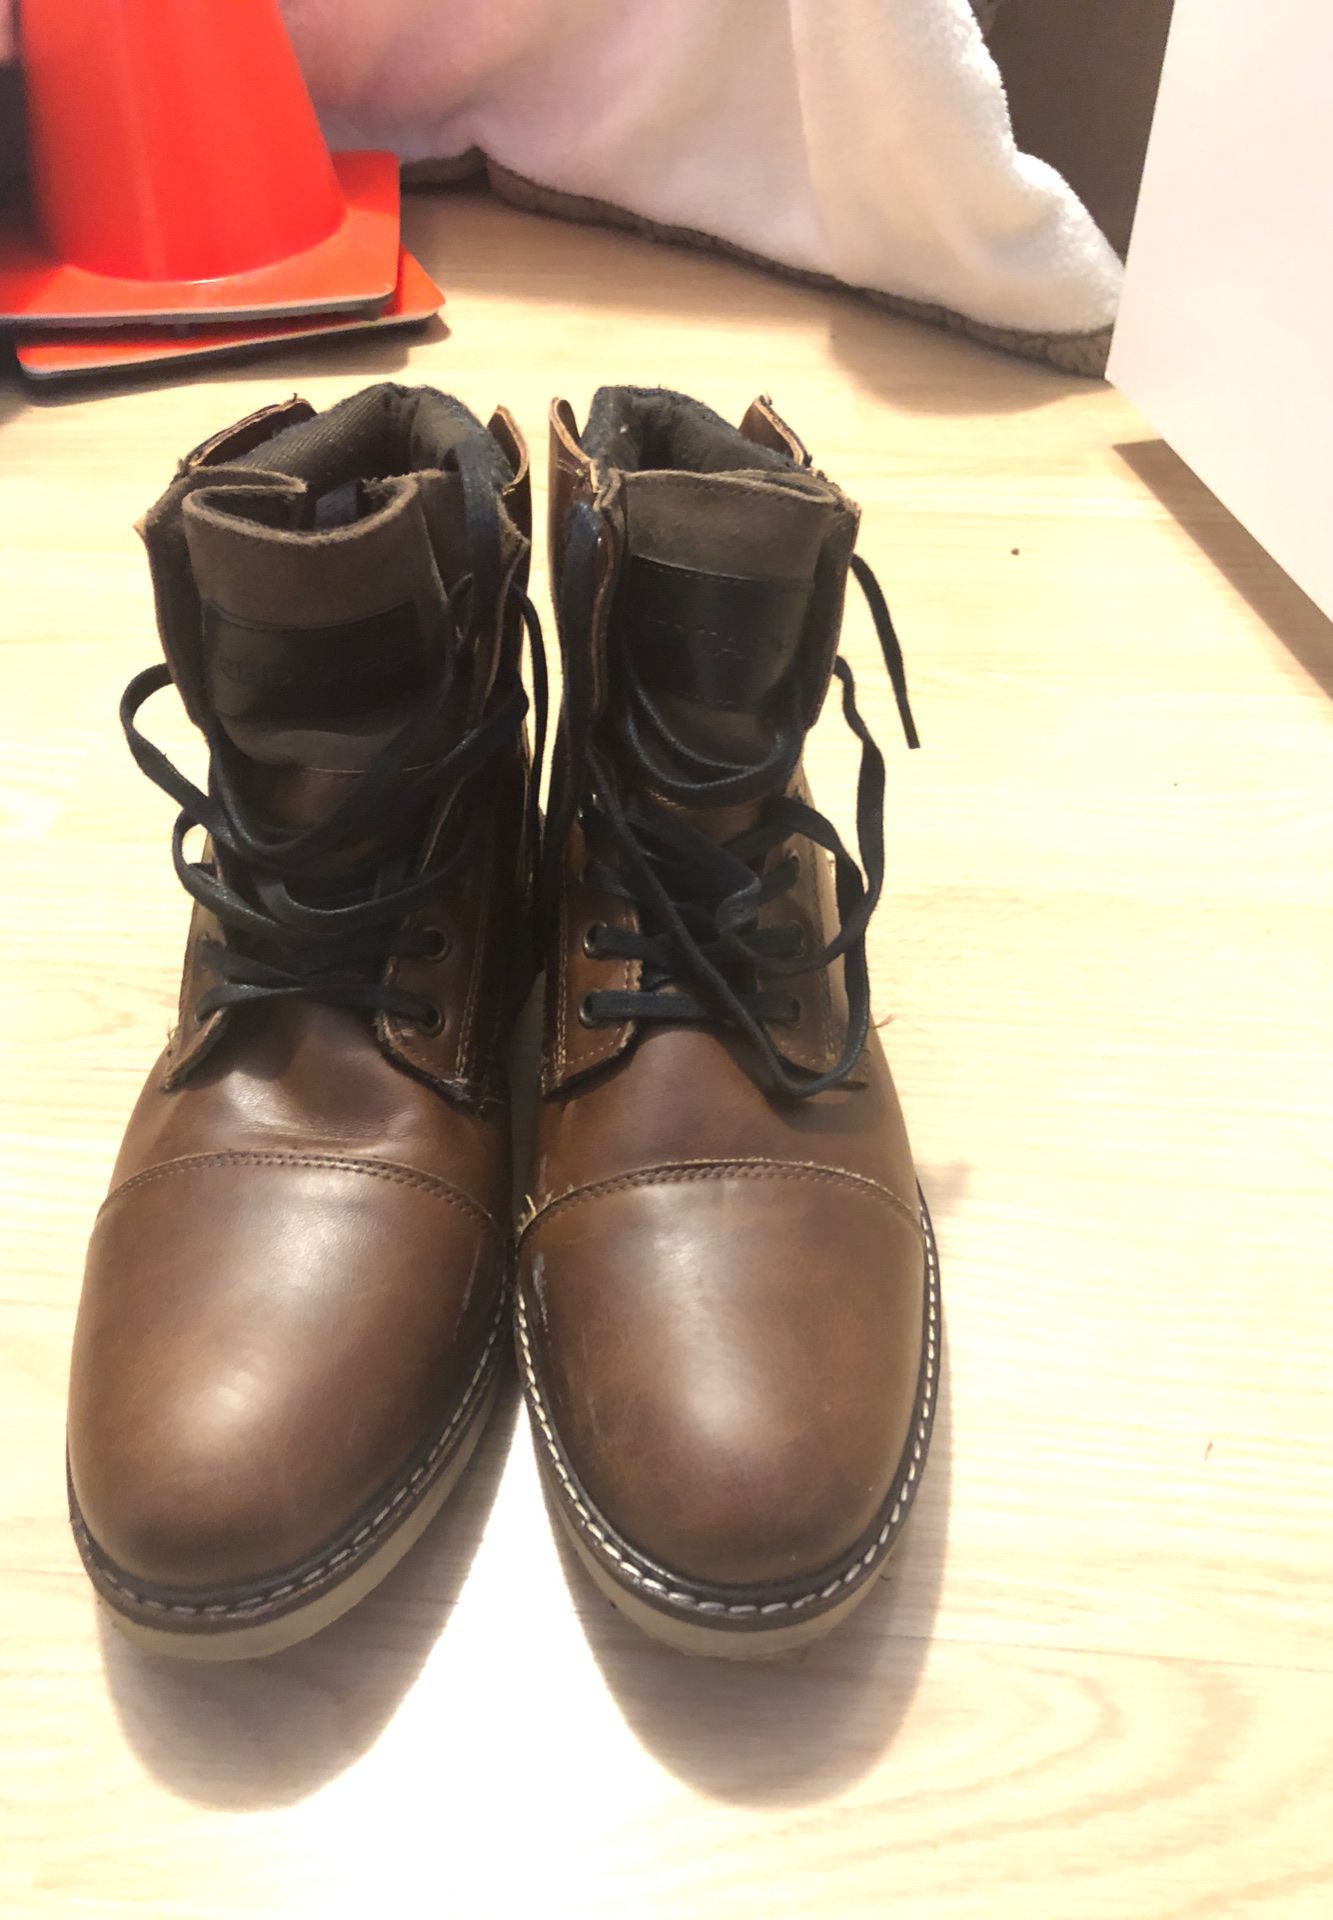 size 10 work boots